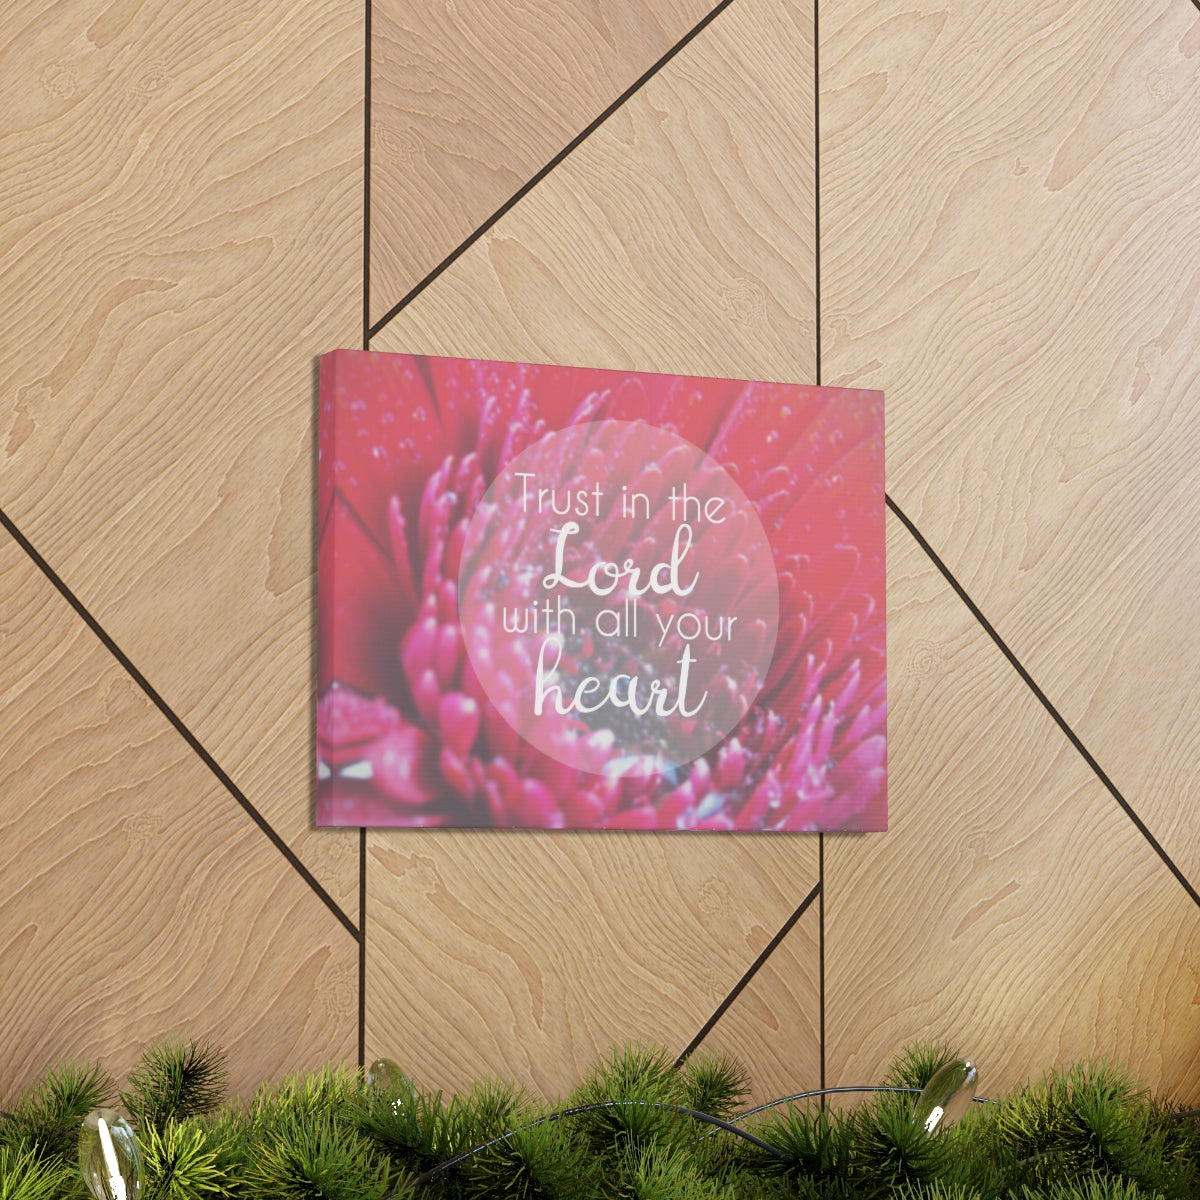 Love Heart Canvas Wall Art - Painting Canvas, Canvas Prints, Painting Art,  Prints for Sale